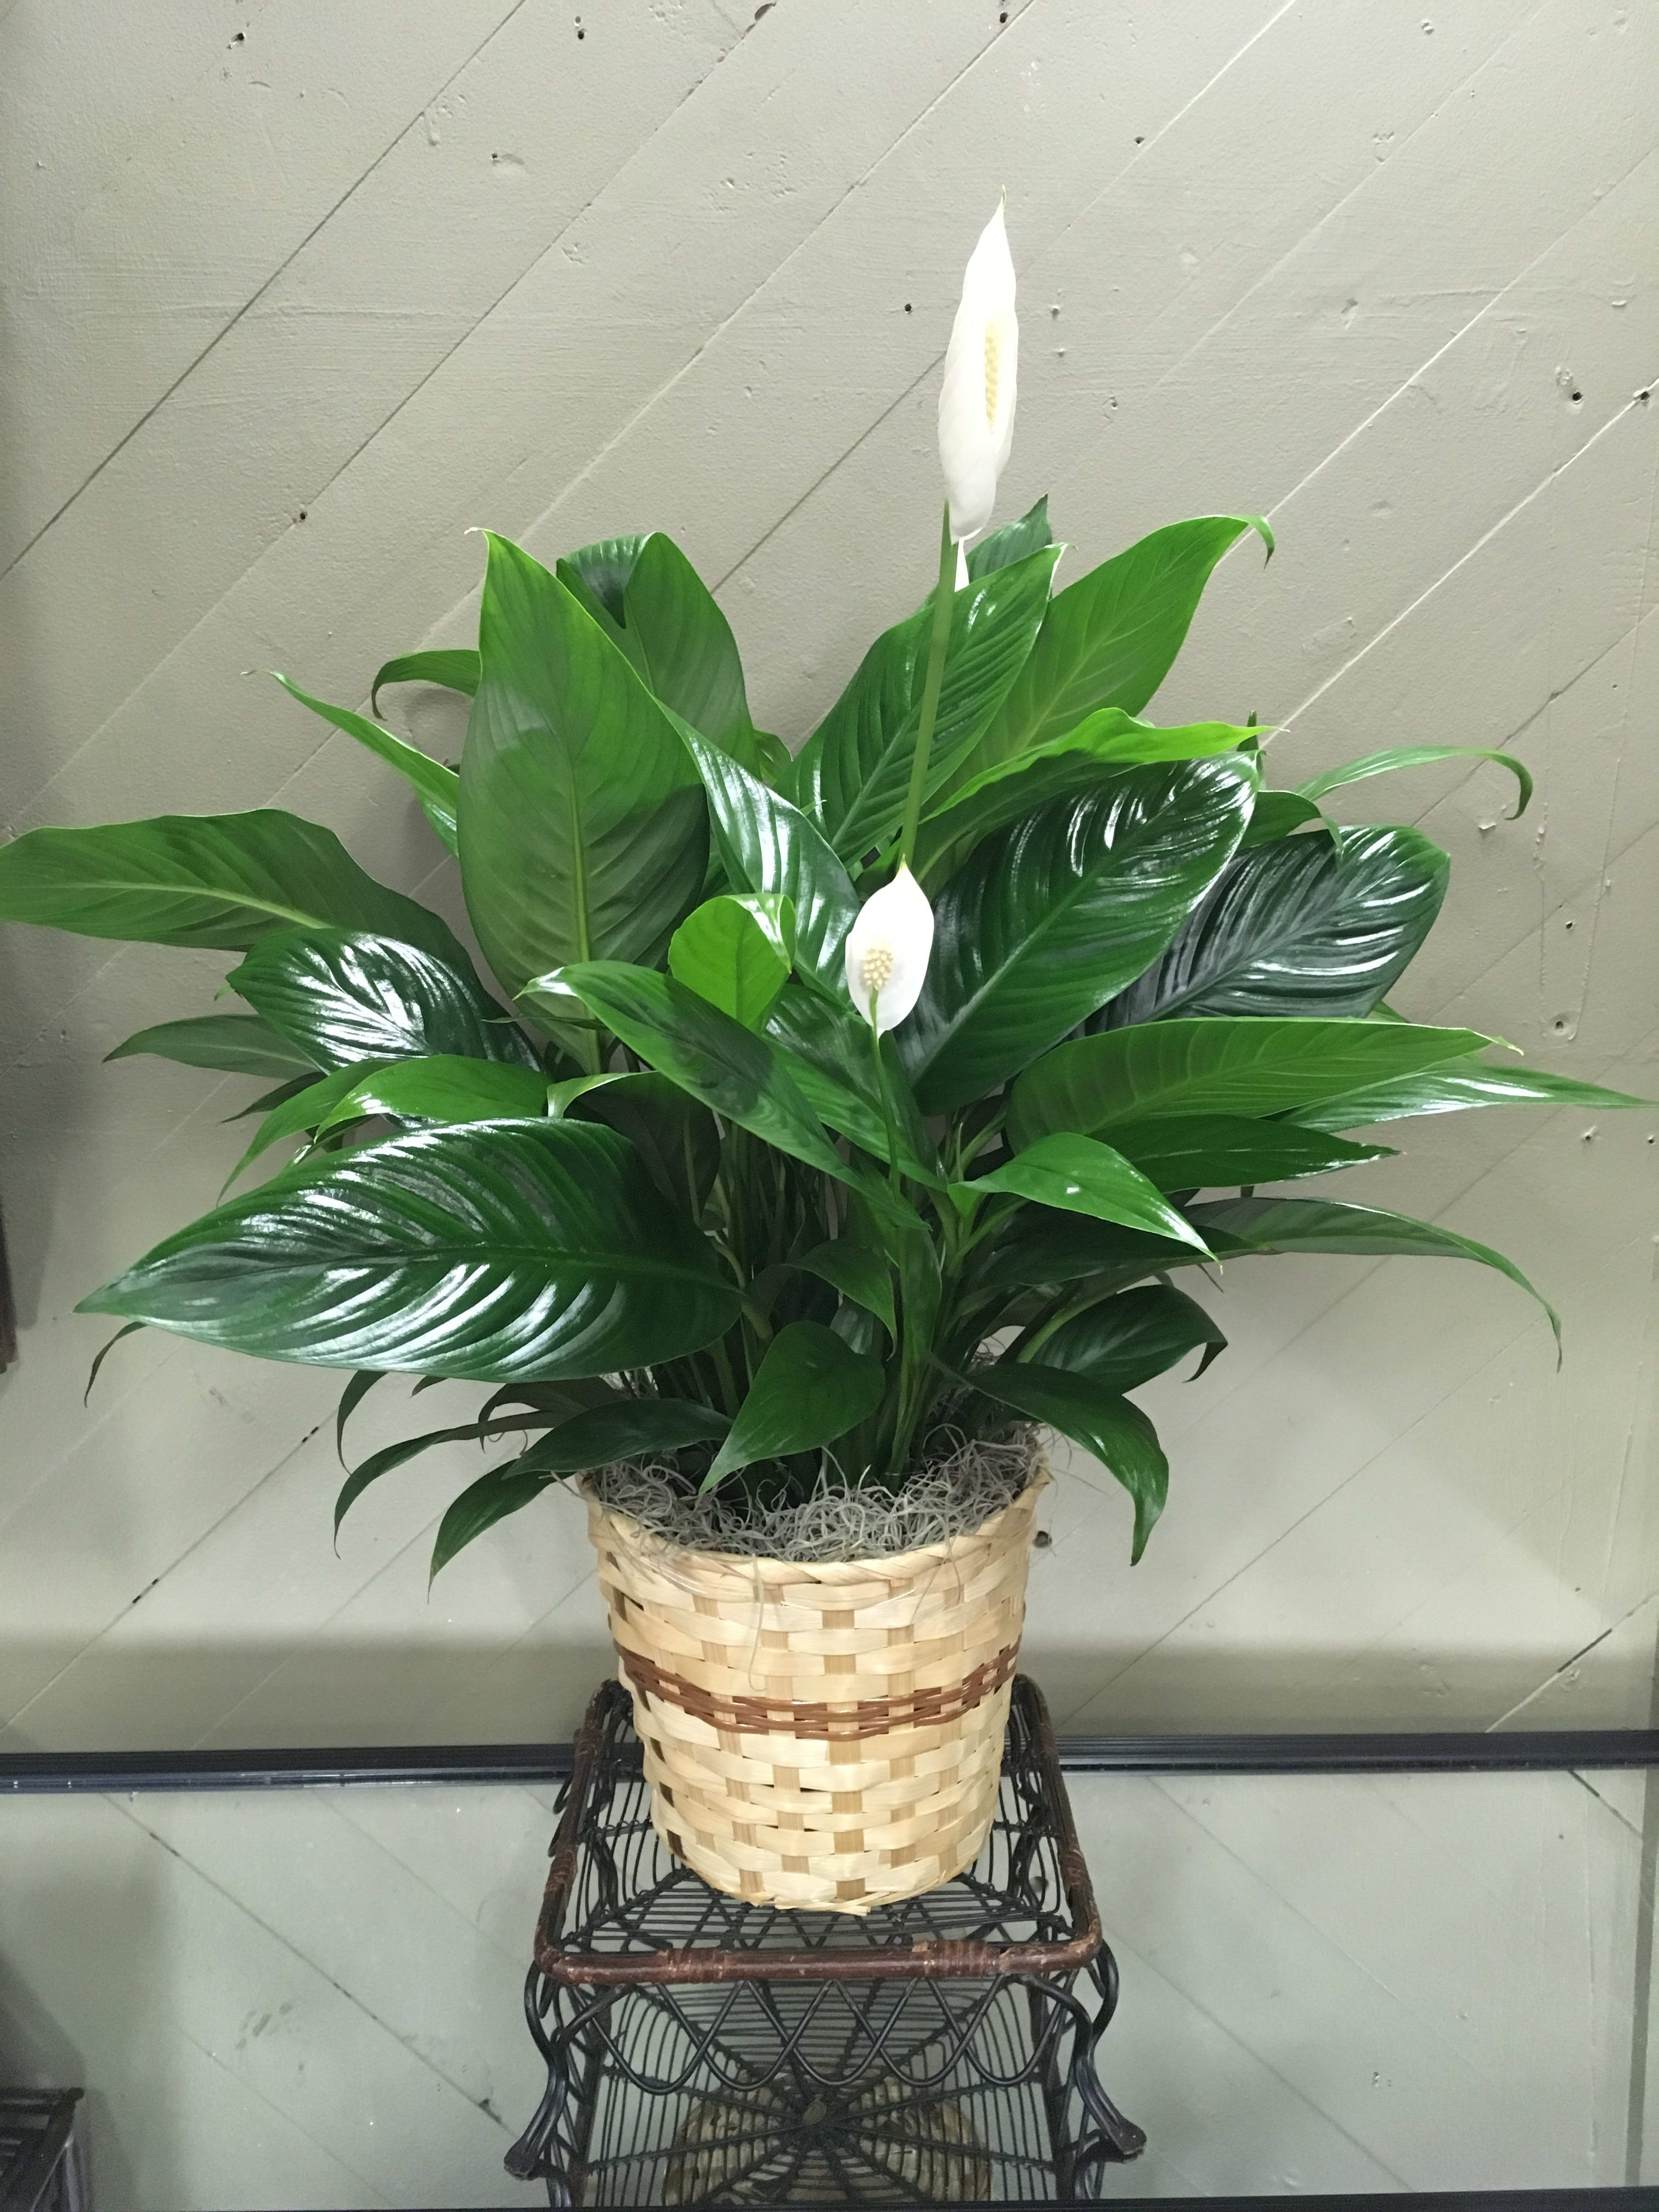 Indoor plant. 6&quot; container with basket. - 6&quot; container indoor plant for the home. Varieties available may include Spathiphyllum, Arboricola, Aglaonema, or Pothos.